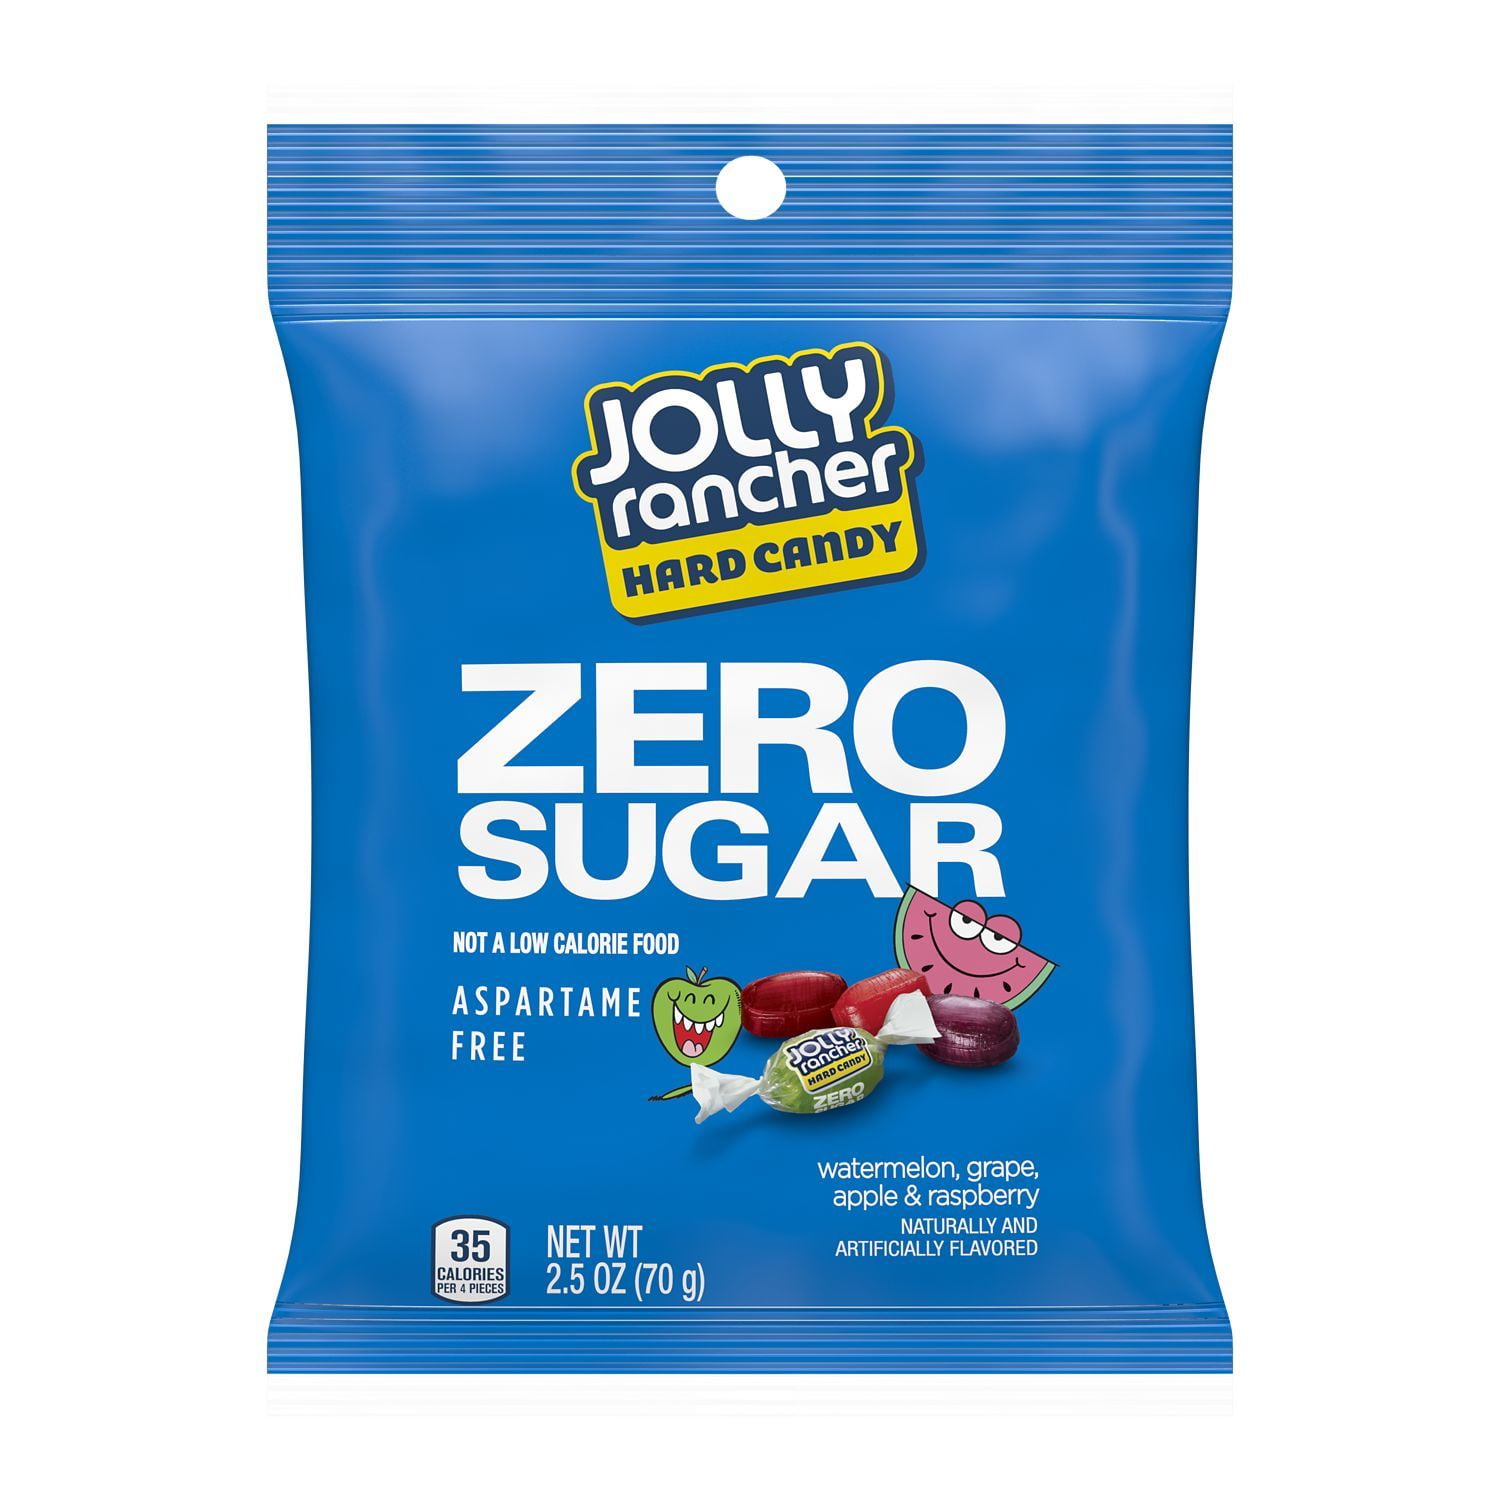 JOLLY RANCHER, Zero Sugar Assorted Fruit Flavored Hard Candy, Individually Wrapped, Aspartame Free, 2.5 oz, Bag